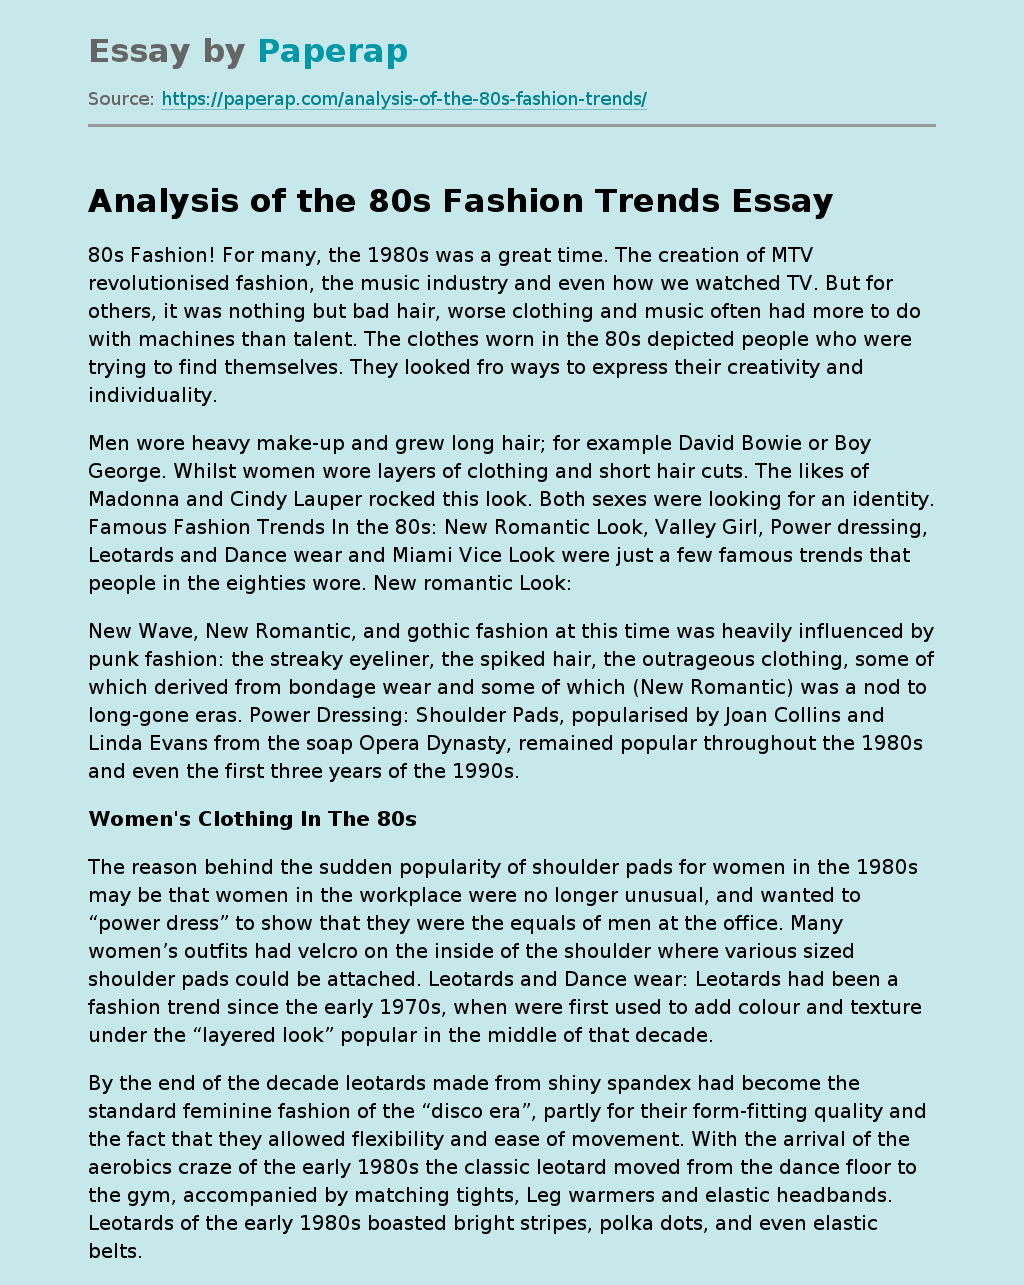 Analysis of the 80s Fashion Trends